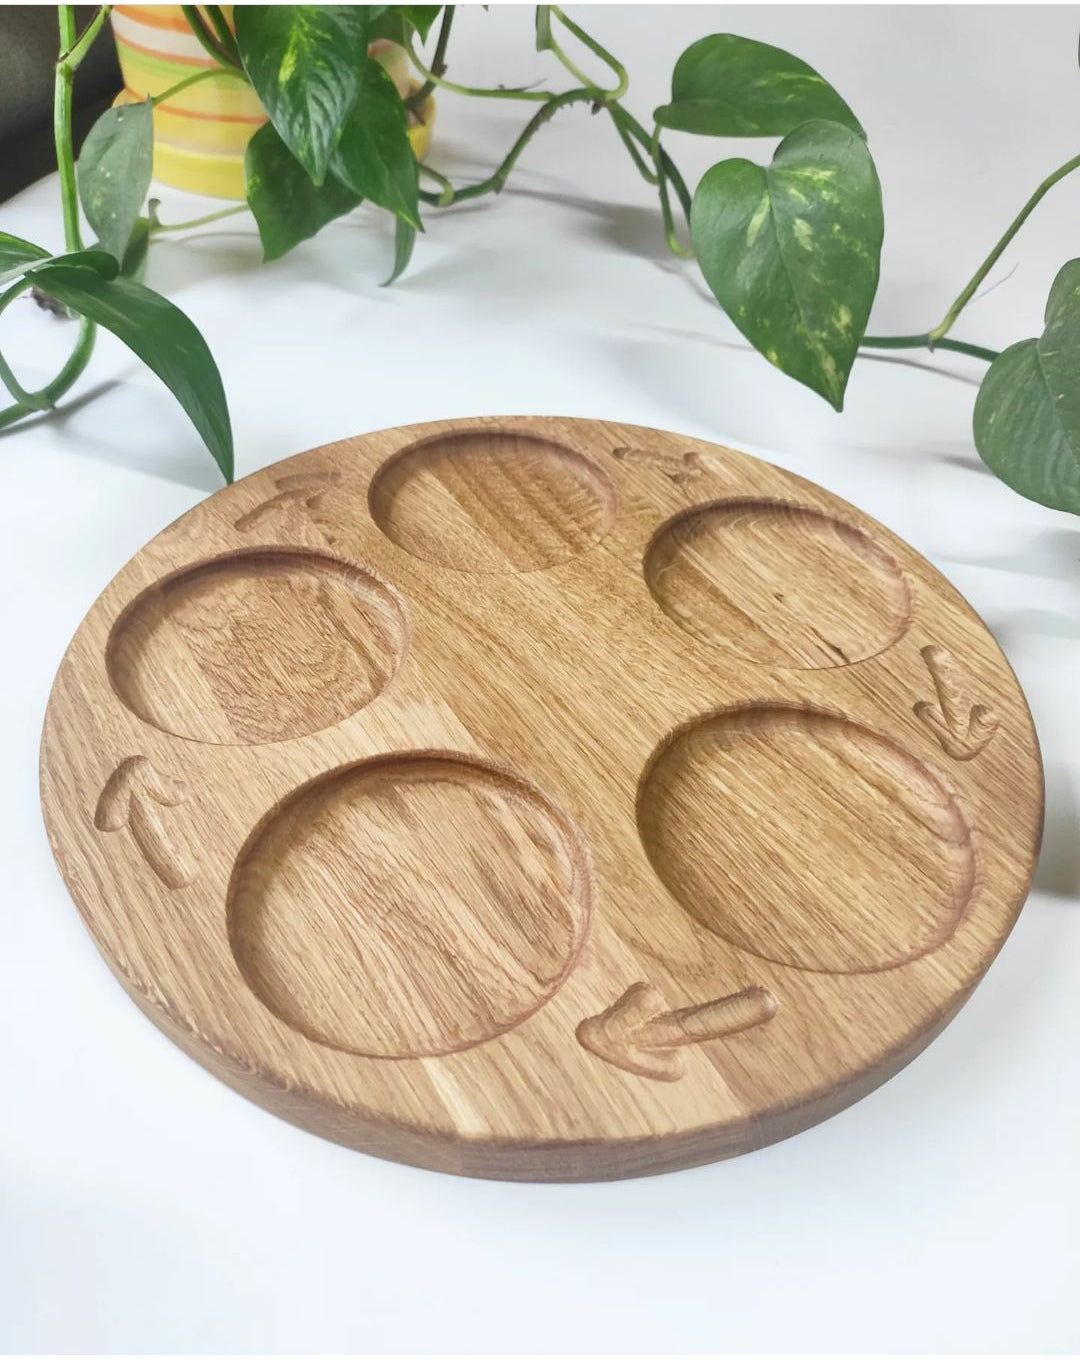 Montessori life cycle reversible tray, with 4 sections on 1 side and with 5 sections on the back side